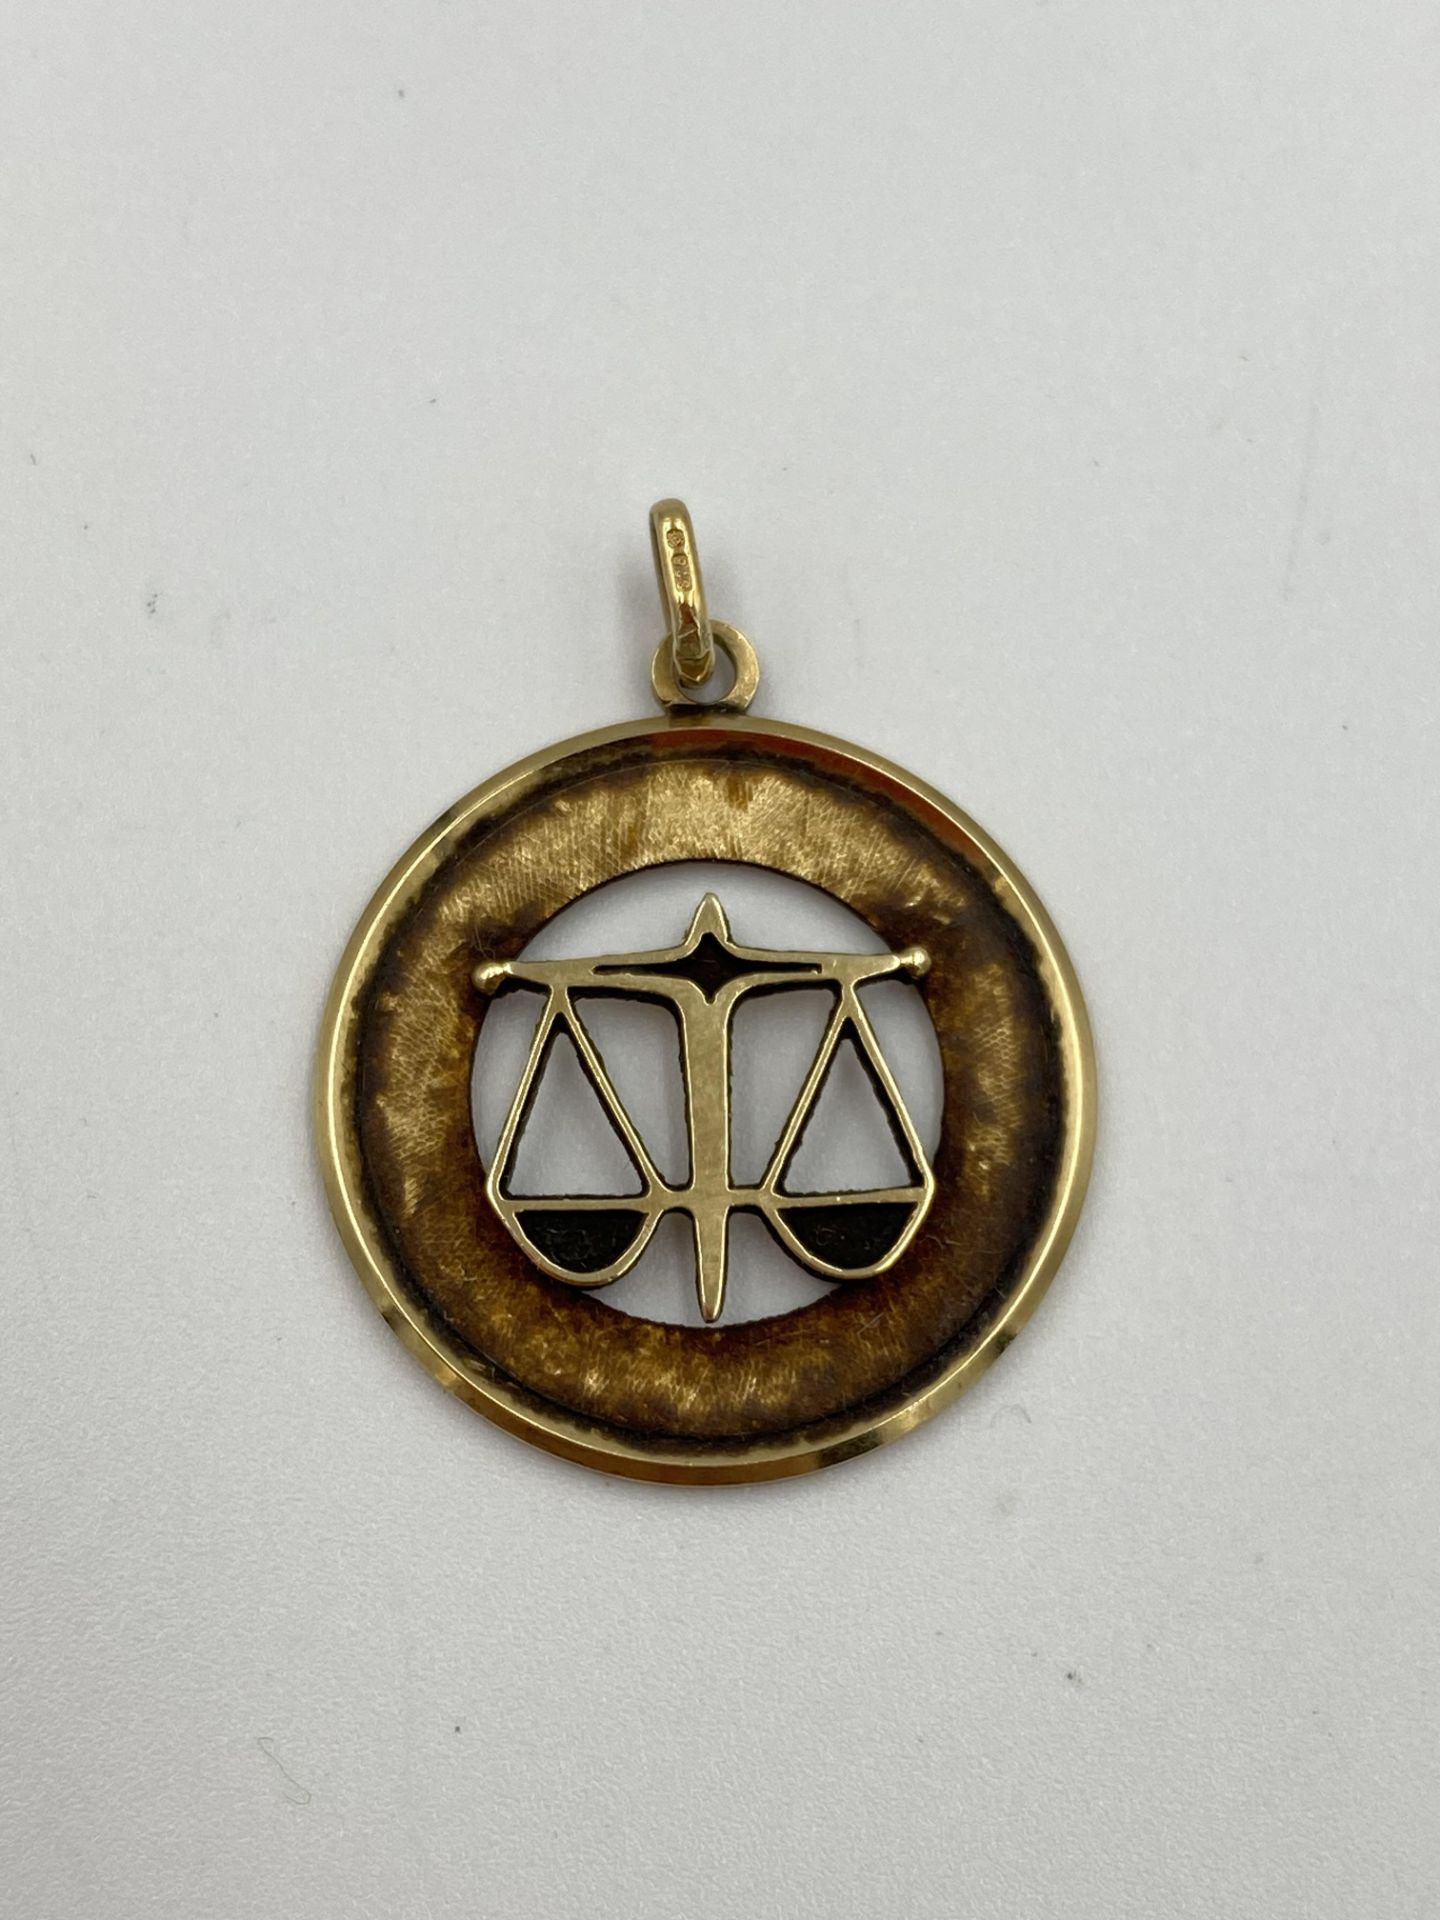 9ct gold pendant - Image 2 of 3